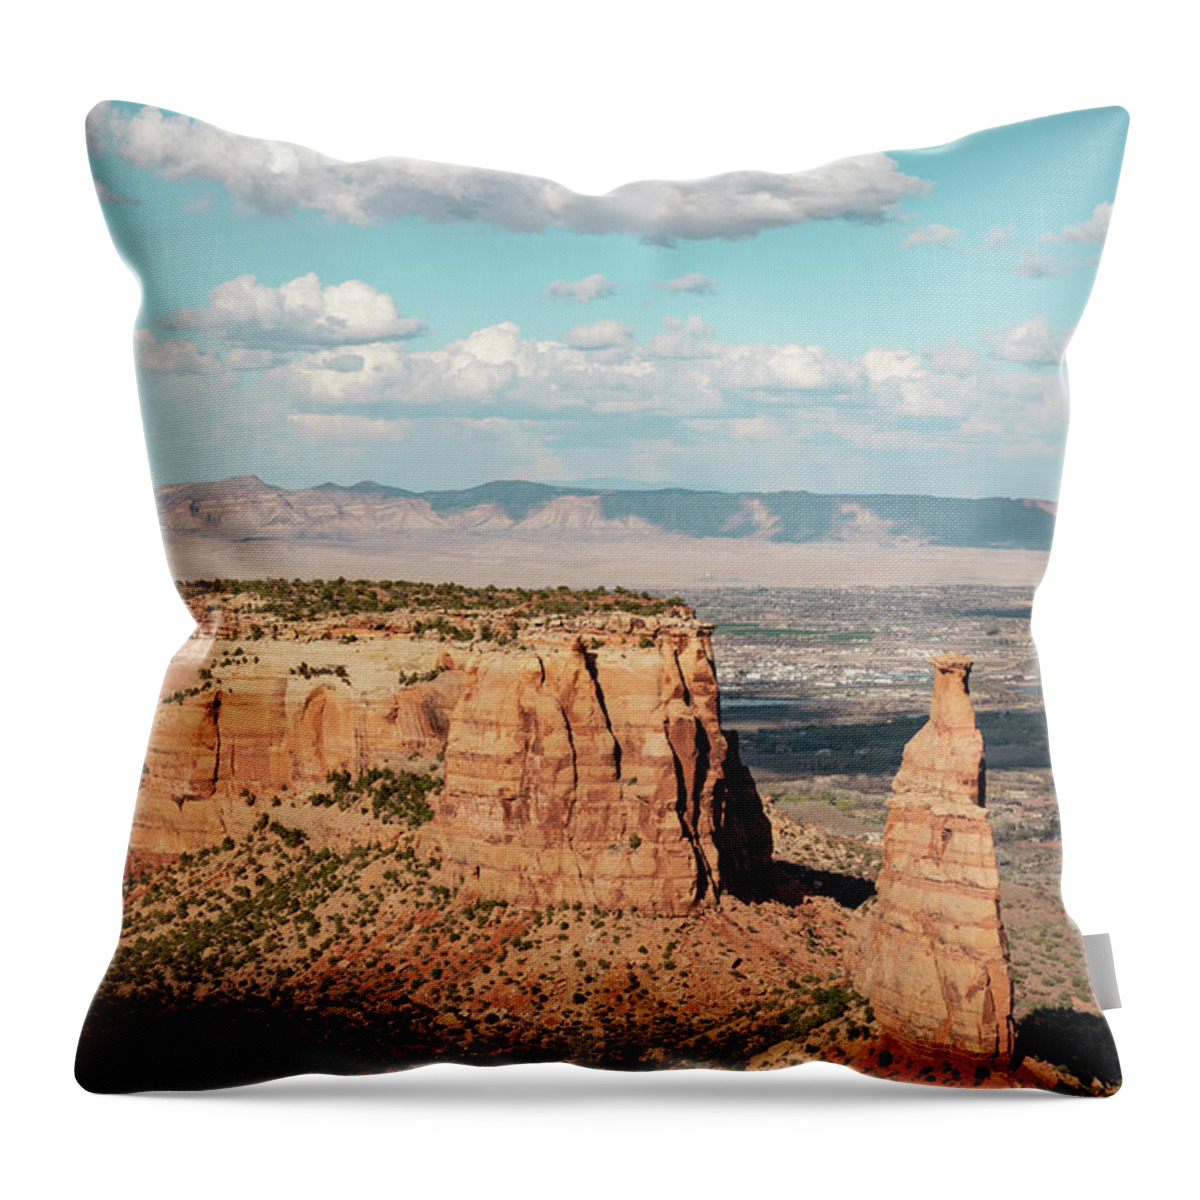 Landscape Throw Pillow featuring the photograph Do You Wish You Were a Cloud by Ana V Ramirez